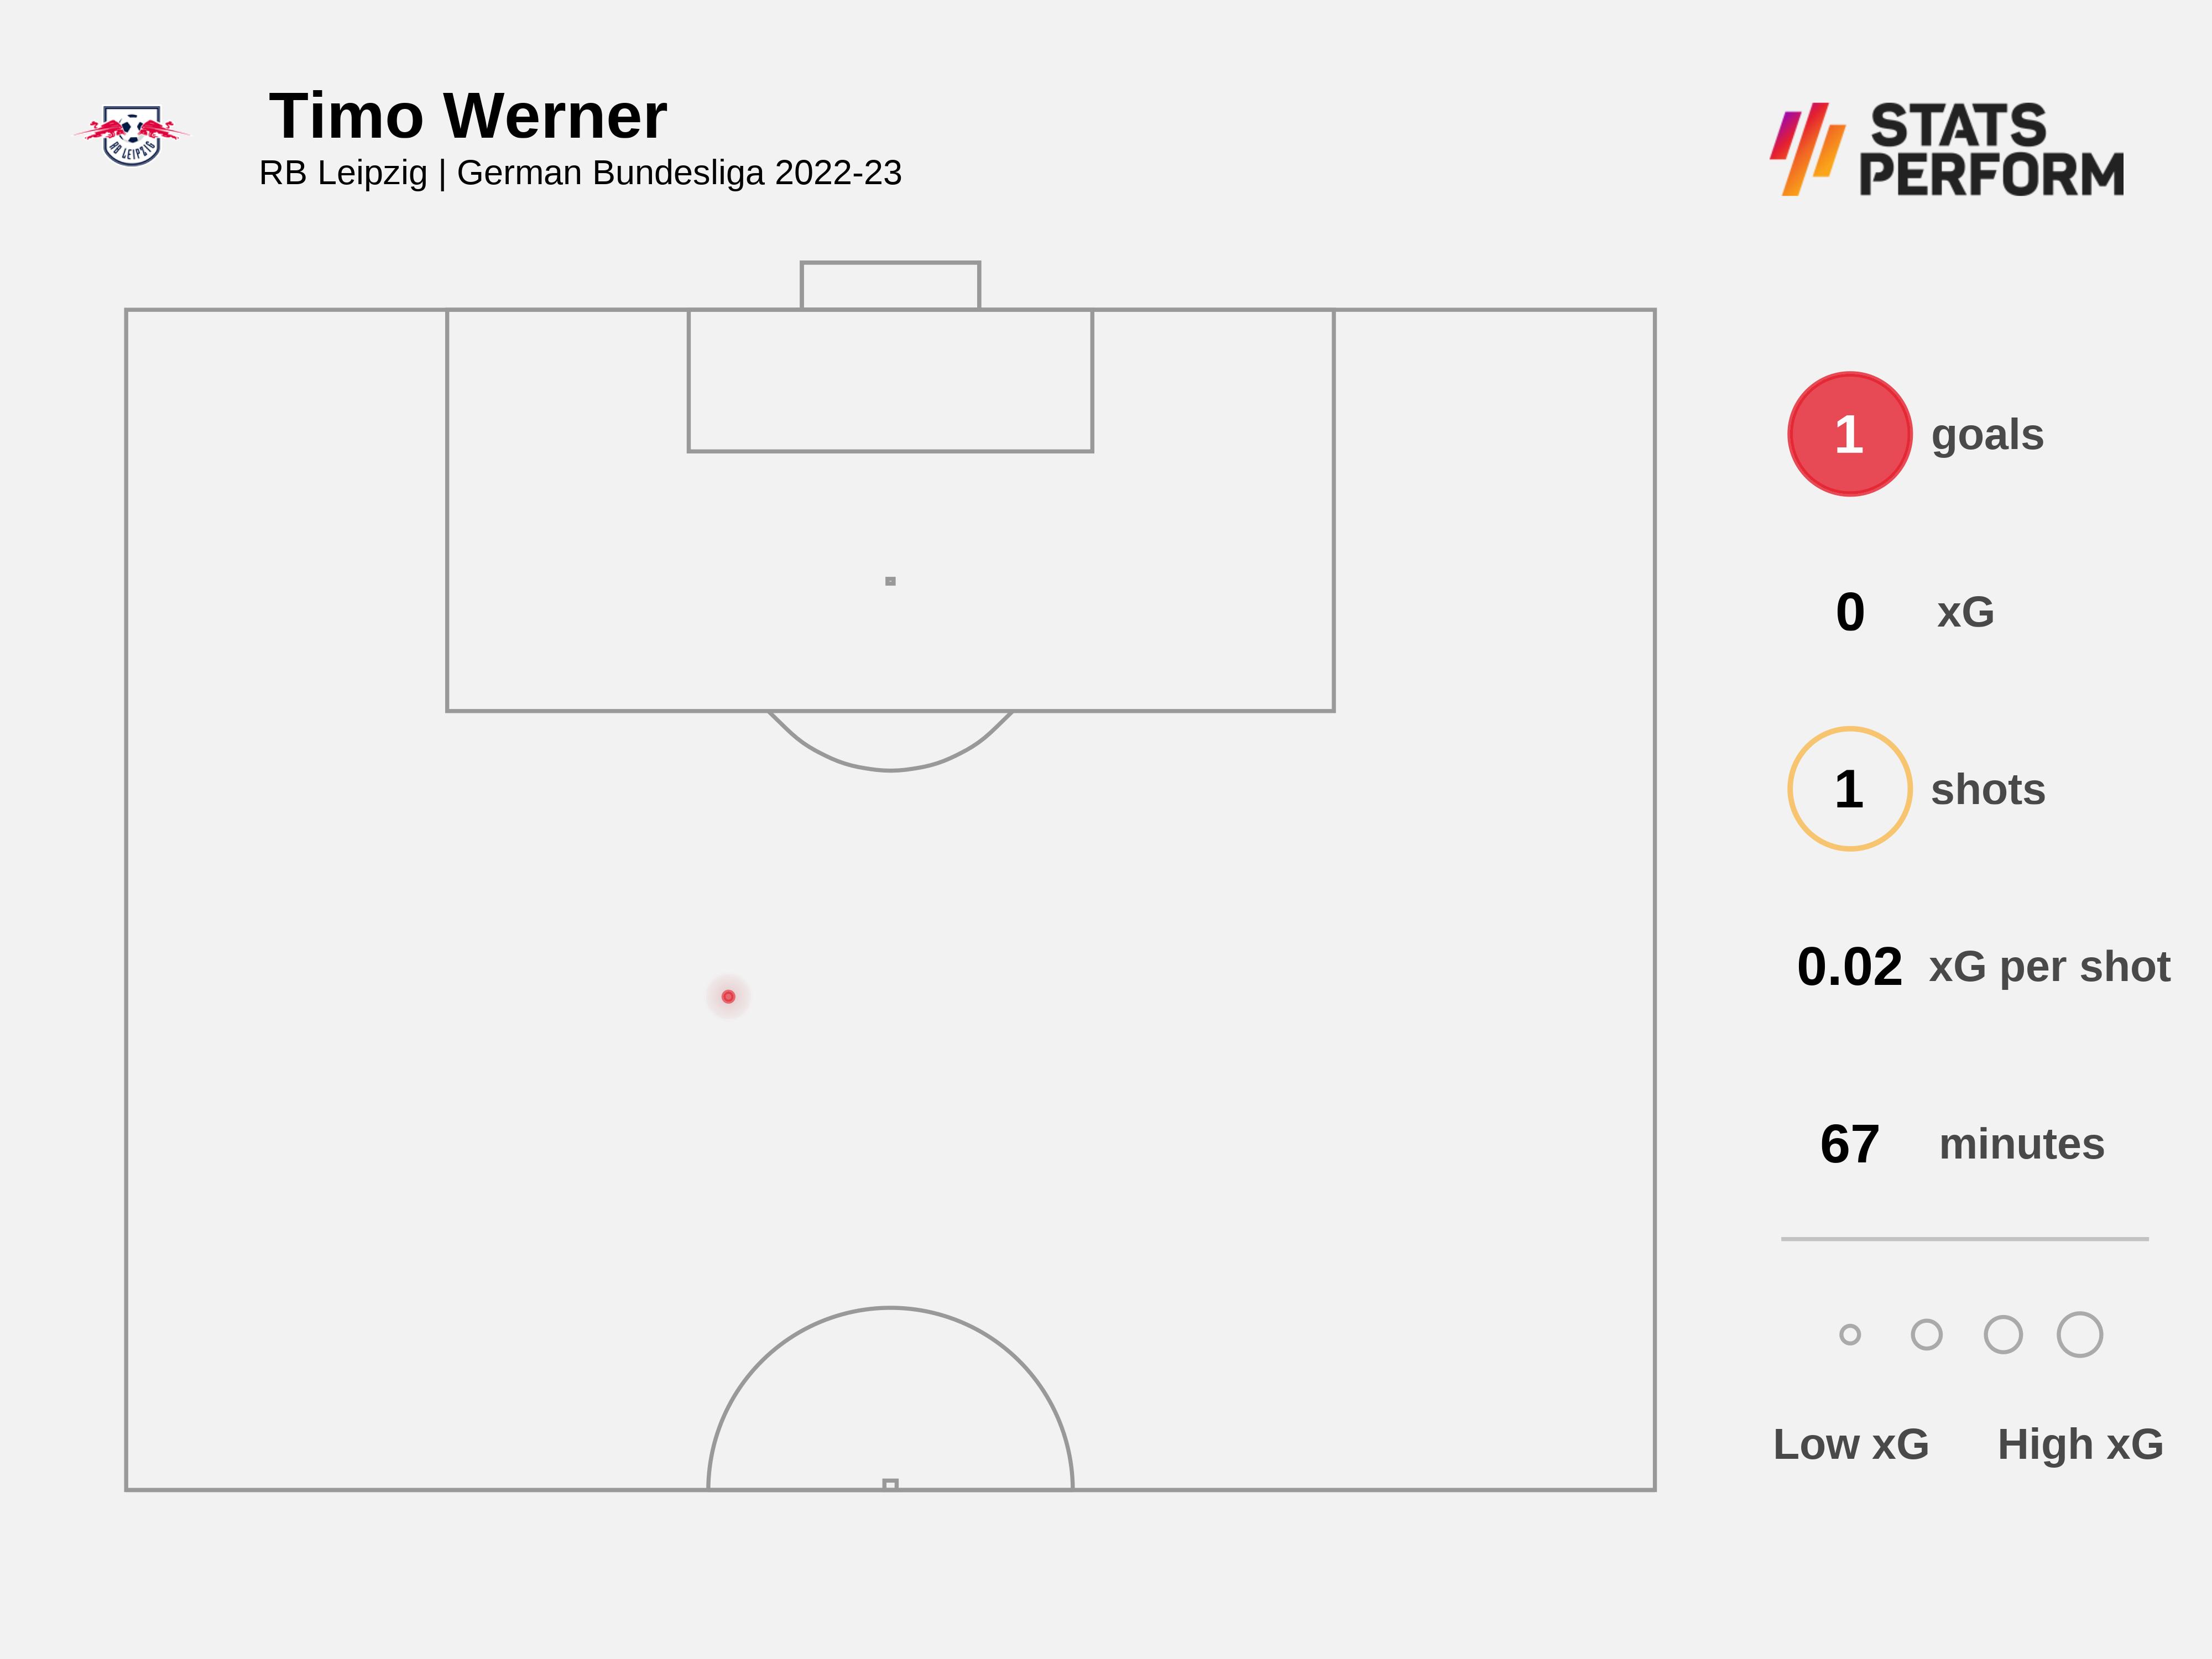 Timo Werner scored on his RB Leipzig debut